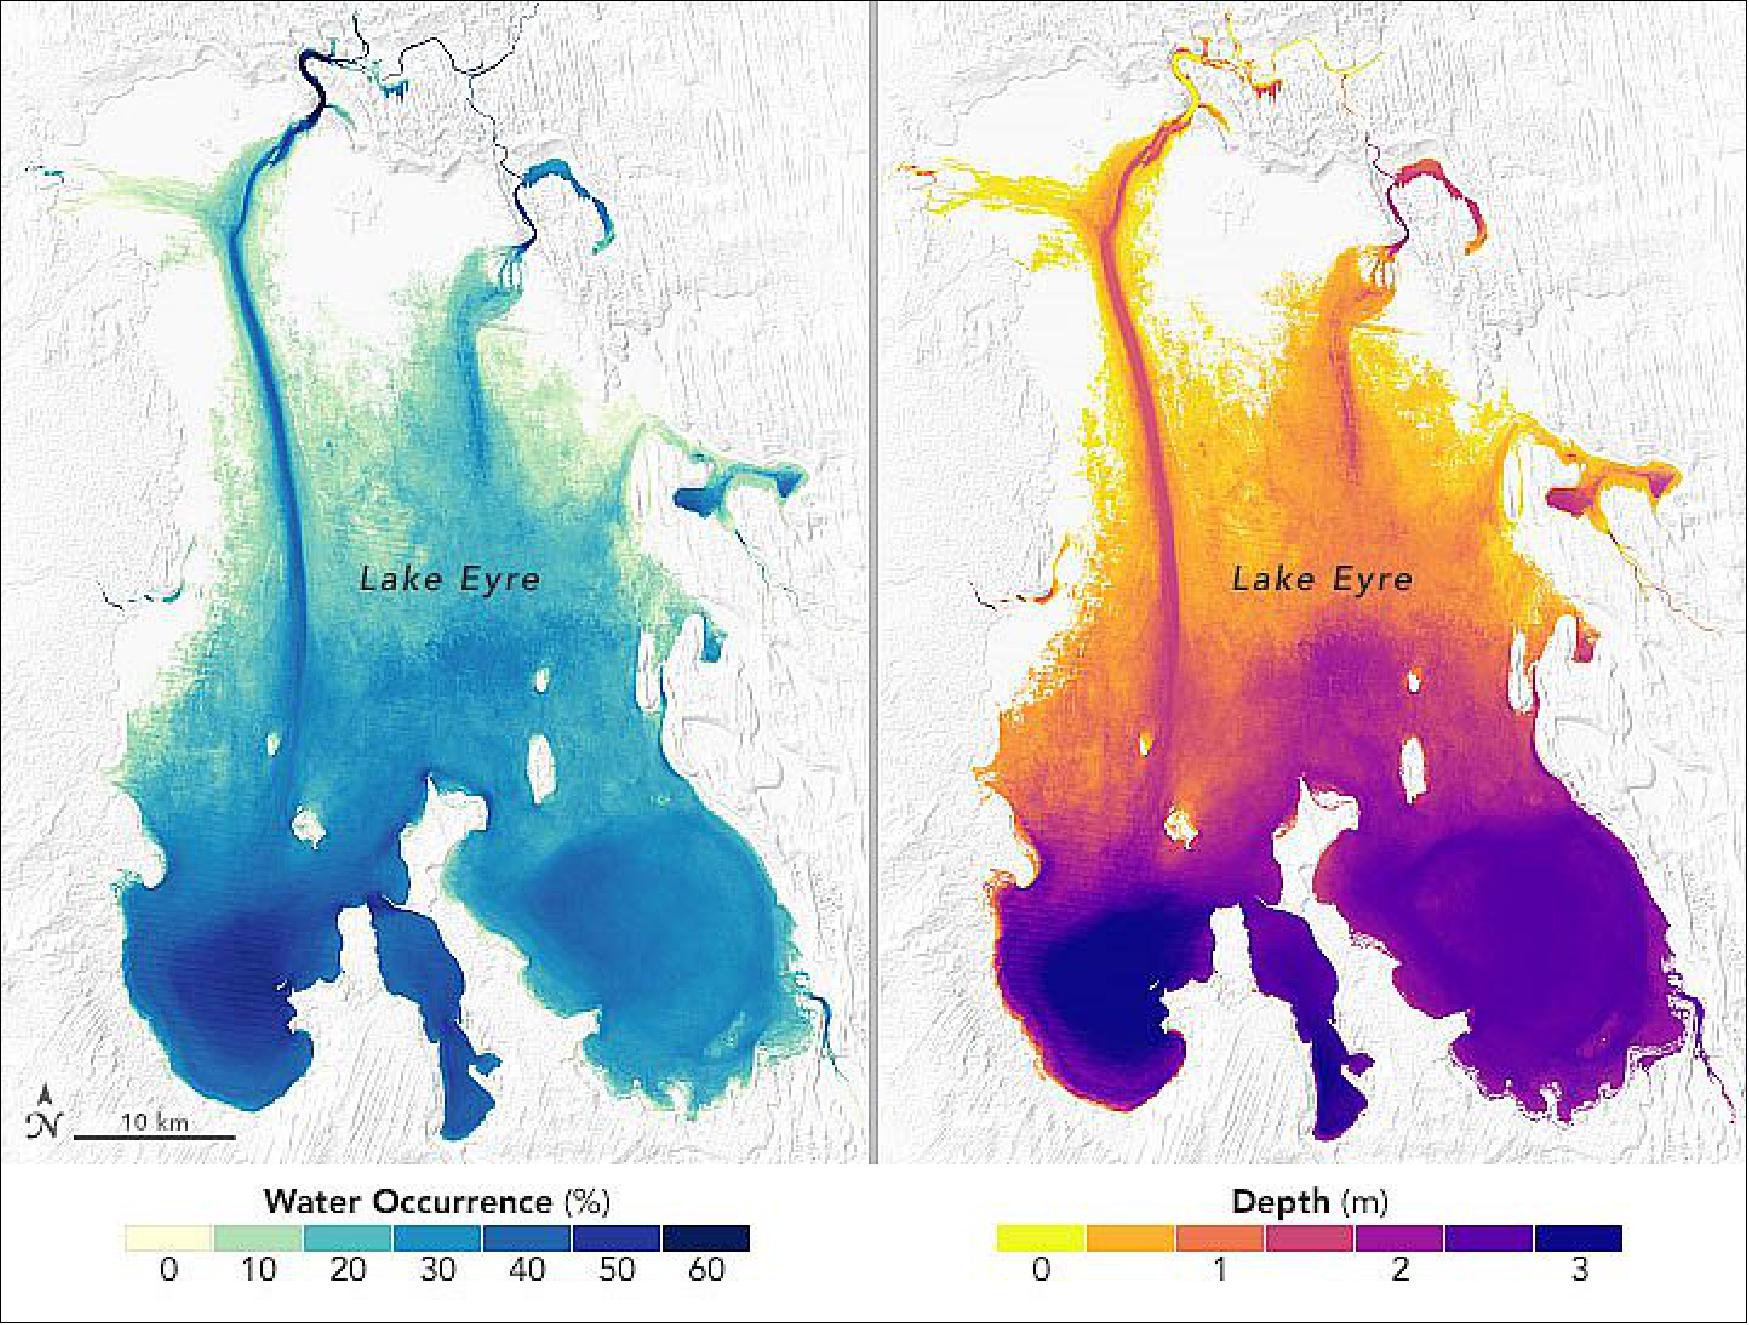 Figure 16: Researchers are using ICESat-2 elevation data to create bathymetry maps of shallow lakes in the remote desert. The left image shows how often—by percentage of the year—water was present in different parts of Lake Eyre from 1984 to 2015. The map was constructed using data from the Global Surface Water Explorer, which quantifies changes in global surface water over the past 32 years using Landsat images. The right image shows the depth of Lake Eyre as reconstructed by Armon and colleagues. They derived the map by combining the Landsat water occurrence data with land elevation data from NASA’s ICESat-2 (Ice, Cloud and land Elevation Satellite-2). ICESat-2 collects elevation measurements of Earth’s surface in narrow swaths over land. Although traditionally used to measure the height of ice sheets, the laser signals from ICESat-2 can penetrate a few meters of water to measure the shape and depths of lake beds and shallow seafloors. The satellite-derived bathymetry results were correlated with field measurements of the lake taken via boat, helicopter, and land surveyors between June 1974 and September 1976 (image credit: NASA Earth Observatory images by Joshua Stevens, using data from Armon, M., et al. (2020). Story by Kasha Patel)